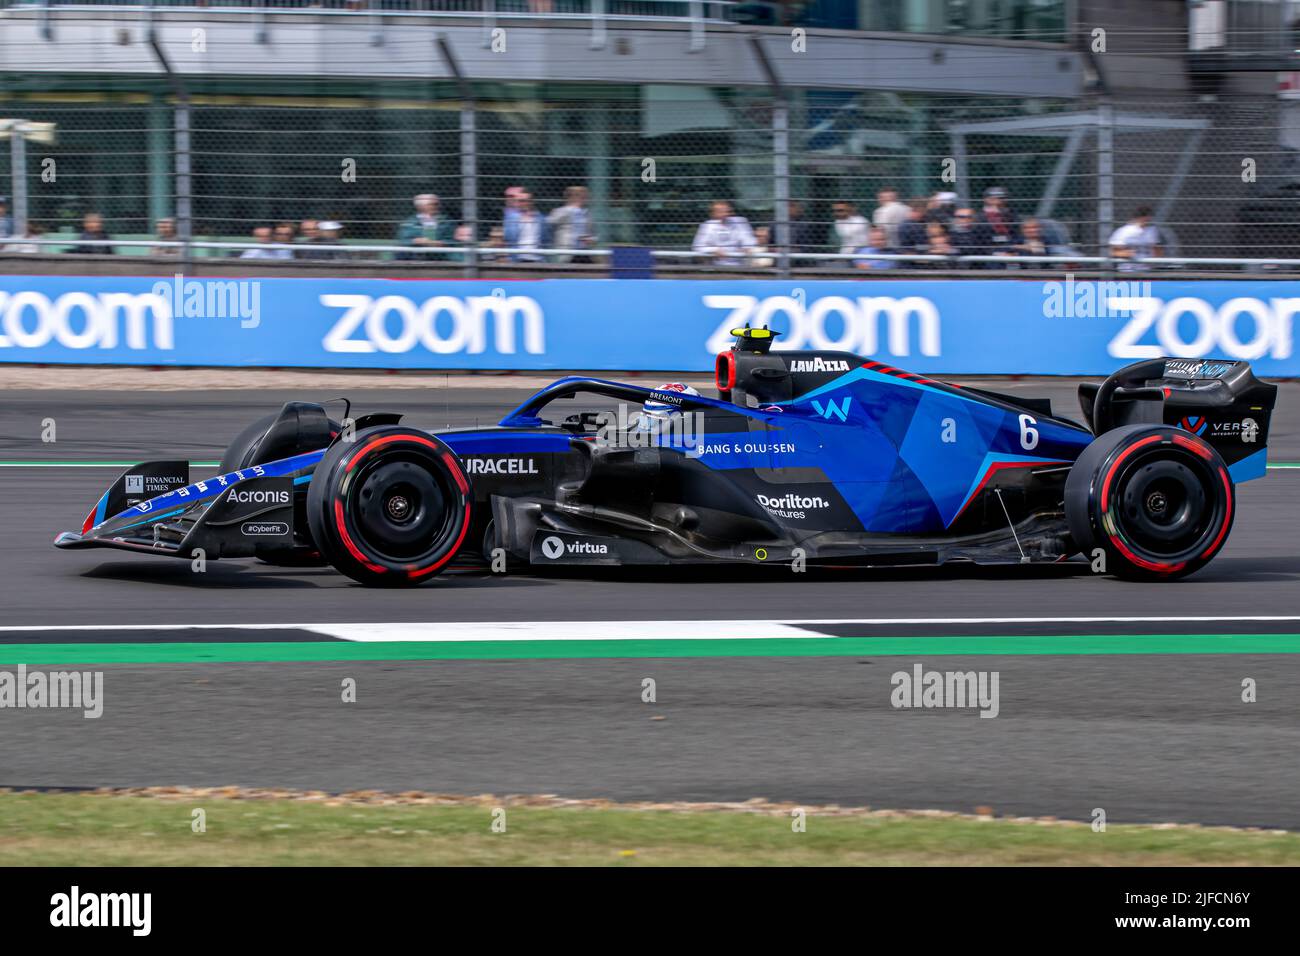 Silverstone, UK, 01st Jul 2022, Nicholas Latifi, from Canada competes for Williams Racing. Practice, round 10 of the 2022 Formula 1 championship. Credit: Michael Potts/Alamy Live News Stock Photo